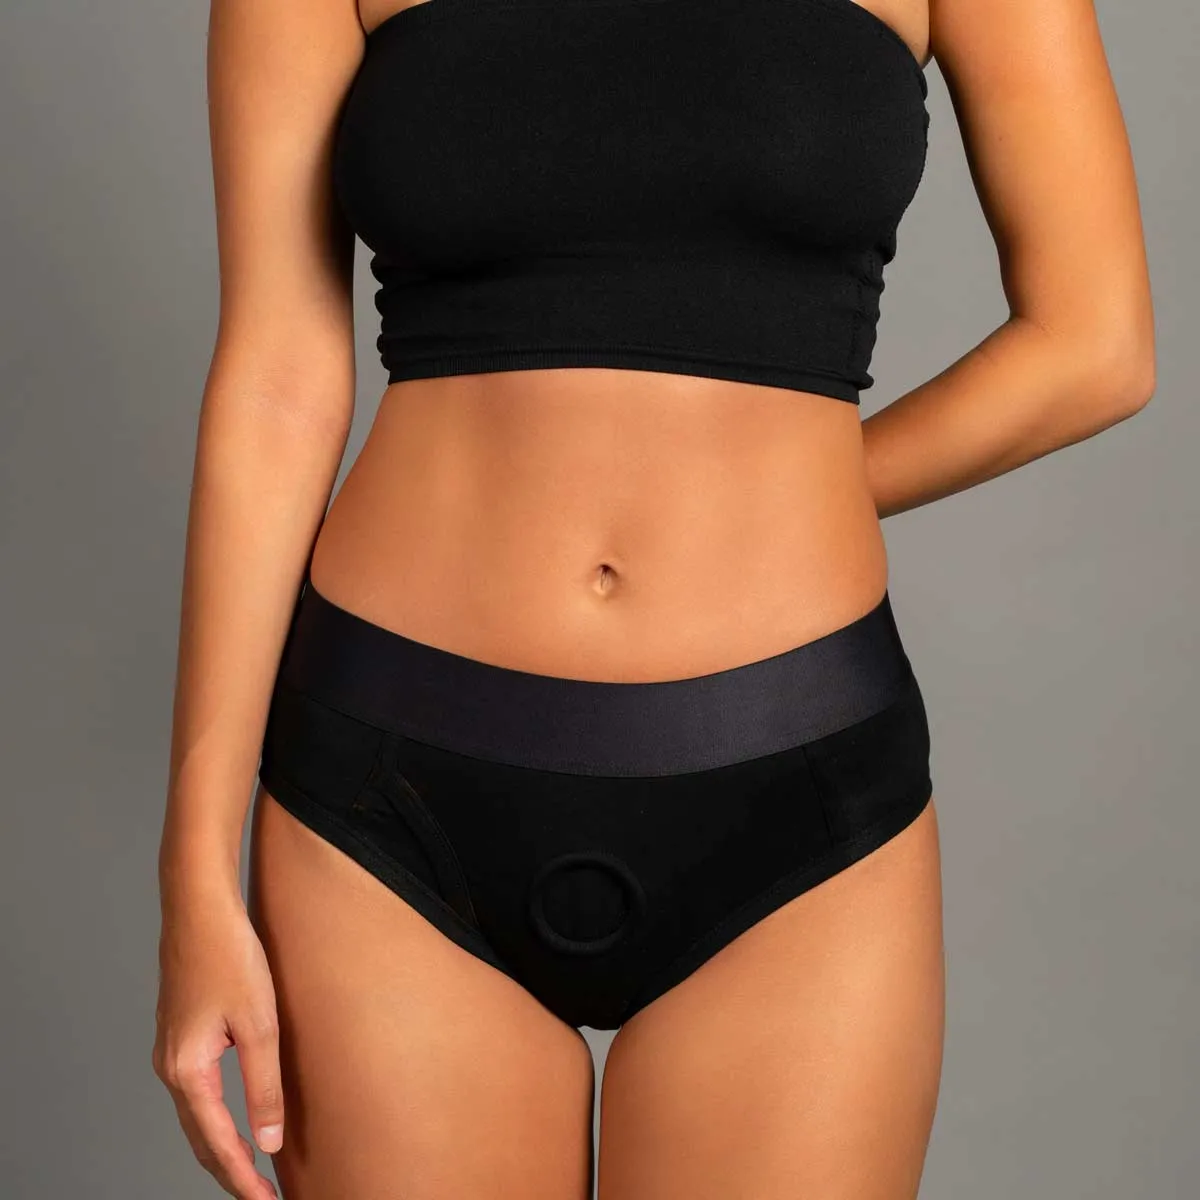 BRIEF PACKER O'RING HARNESS BLACK XS-3X